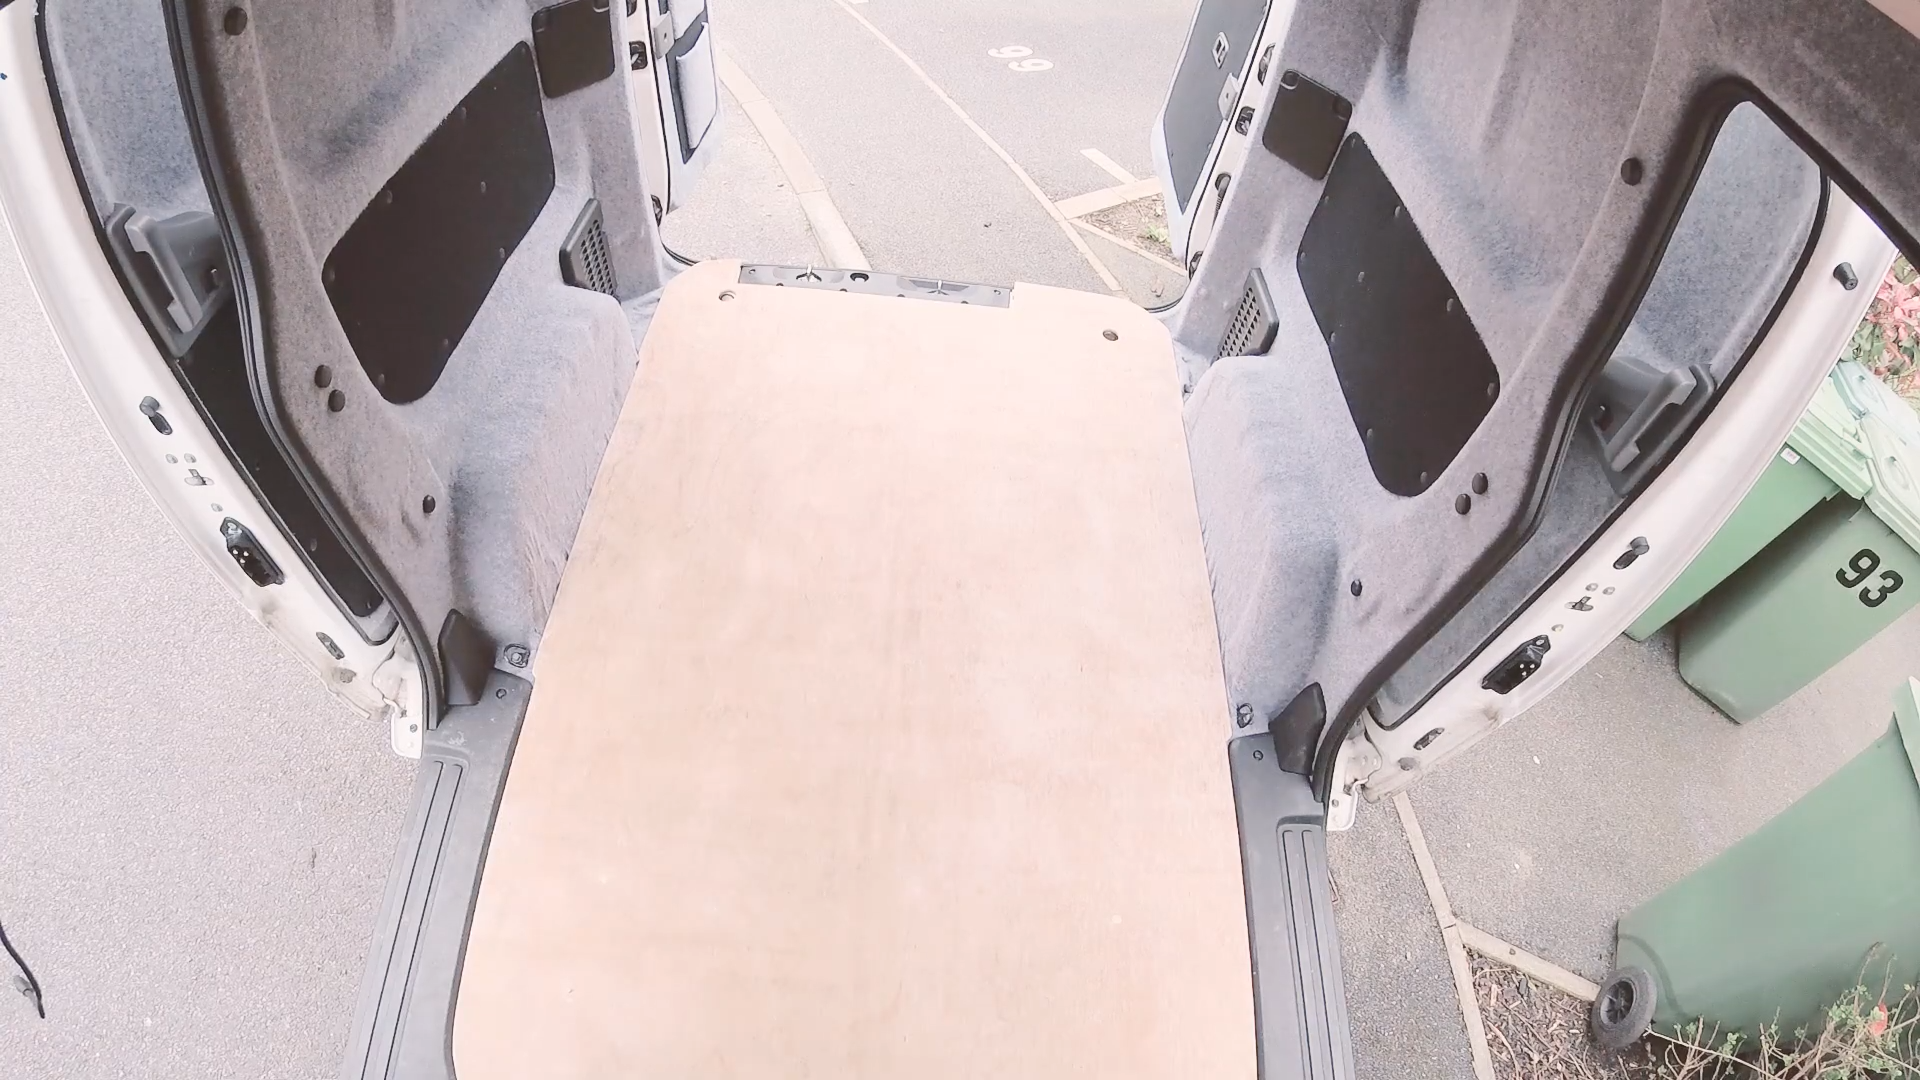 The sanded plywood floor fitted back in the van